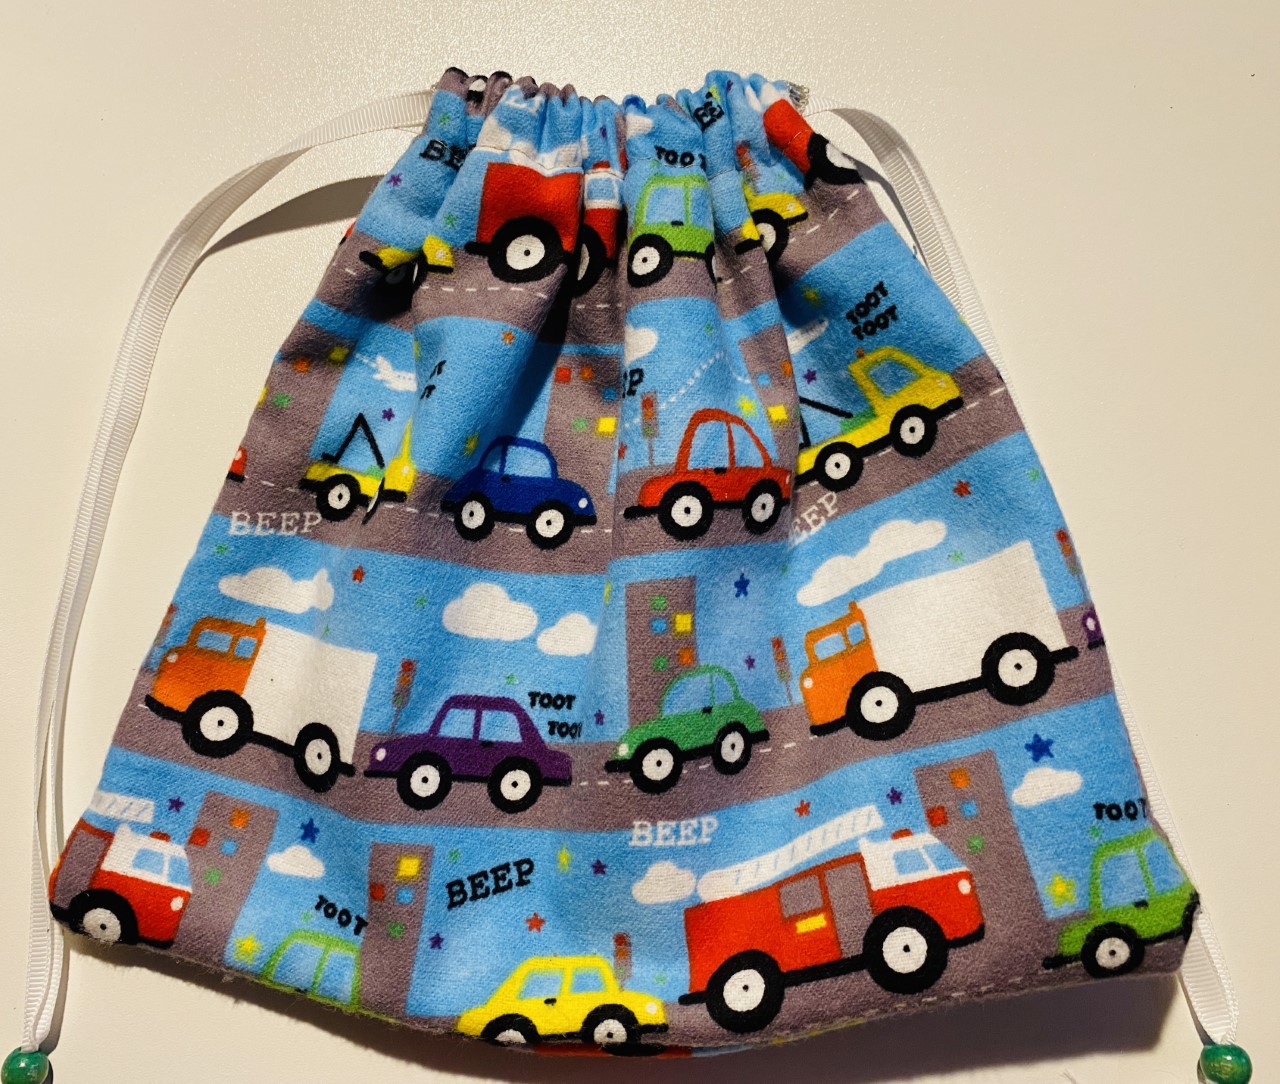 10 inch flannel drawstring gift bag with cars, trucks, fire trucks, beep beep images